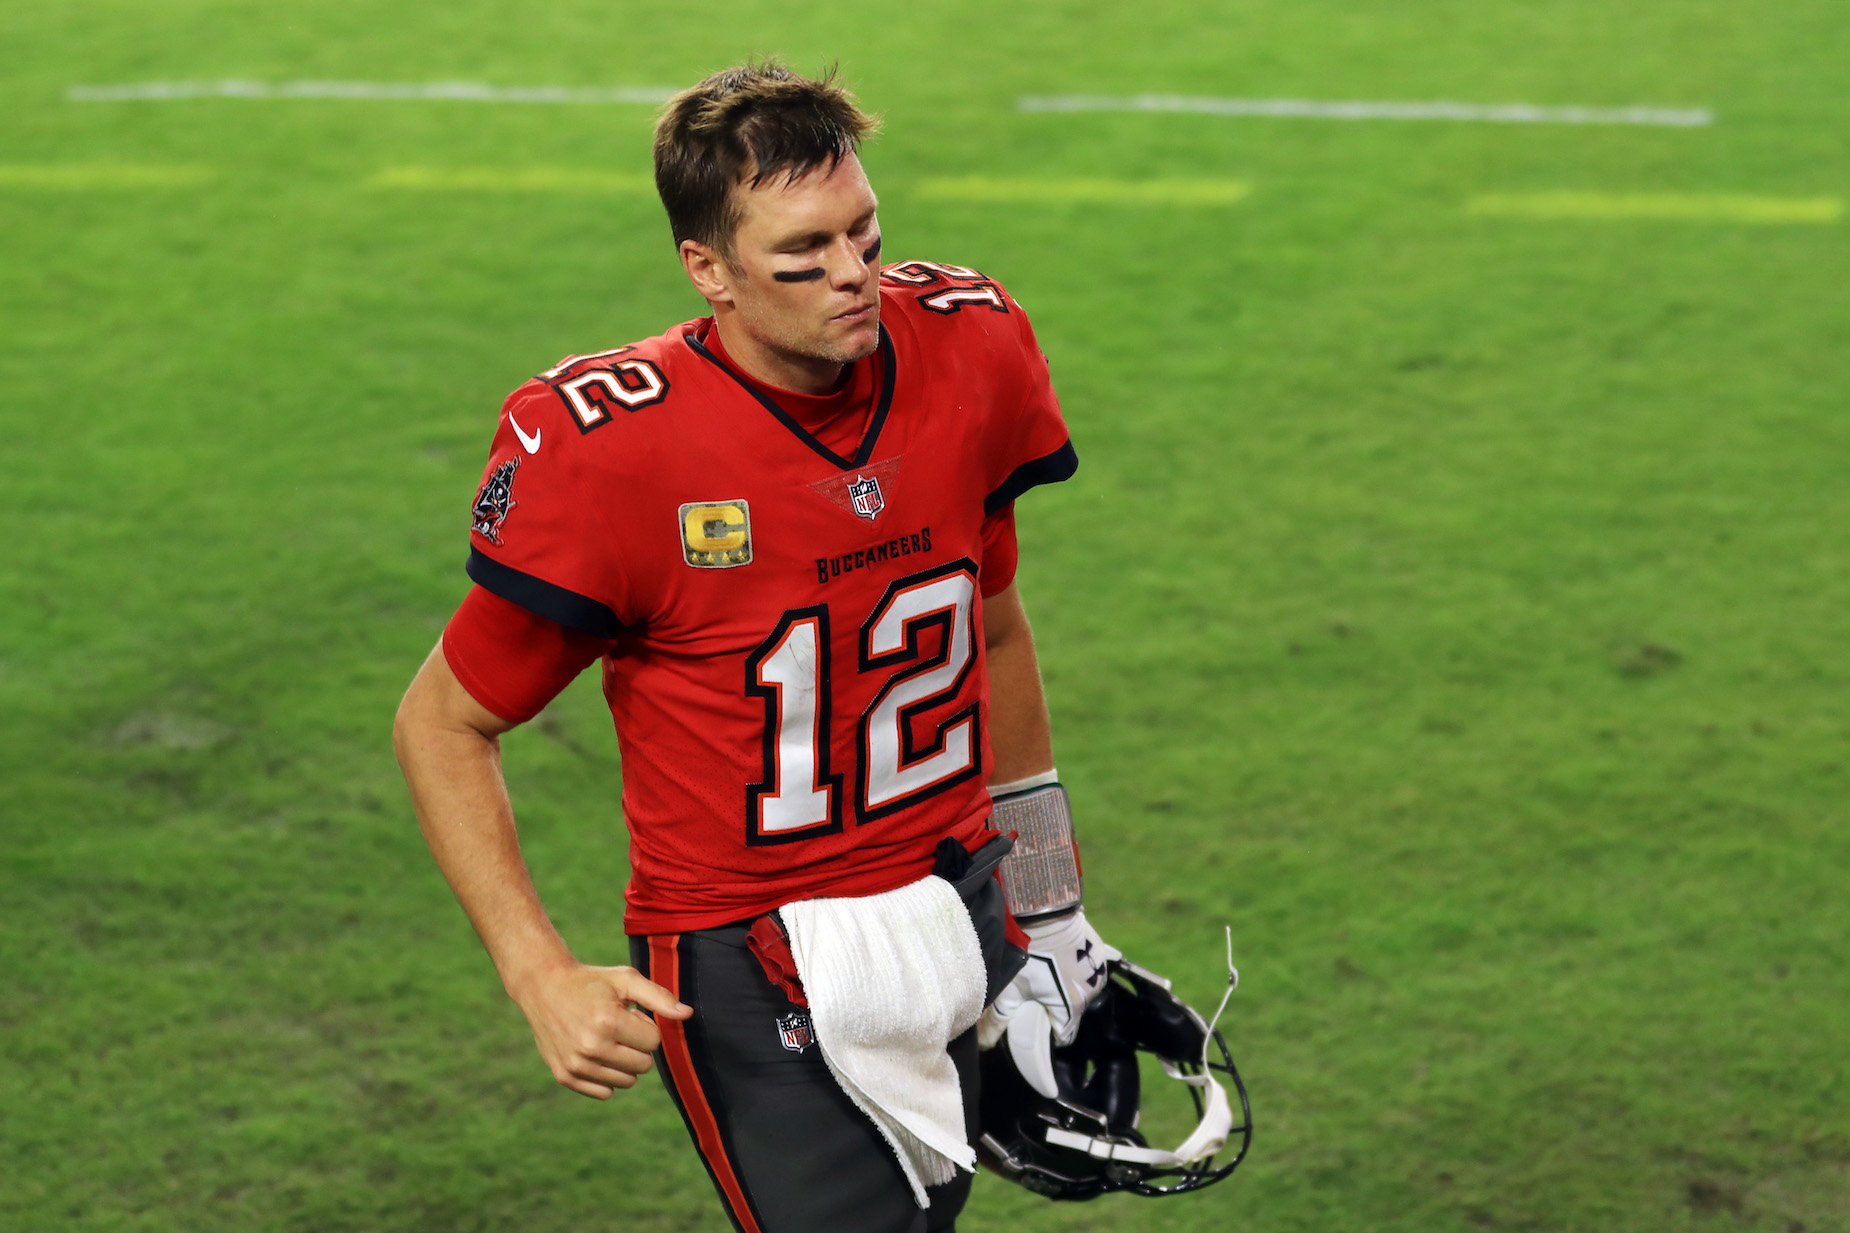 Tom Brady's Bucaneers lost to the New Orleans Saints on Sunday night.